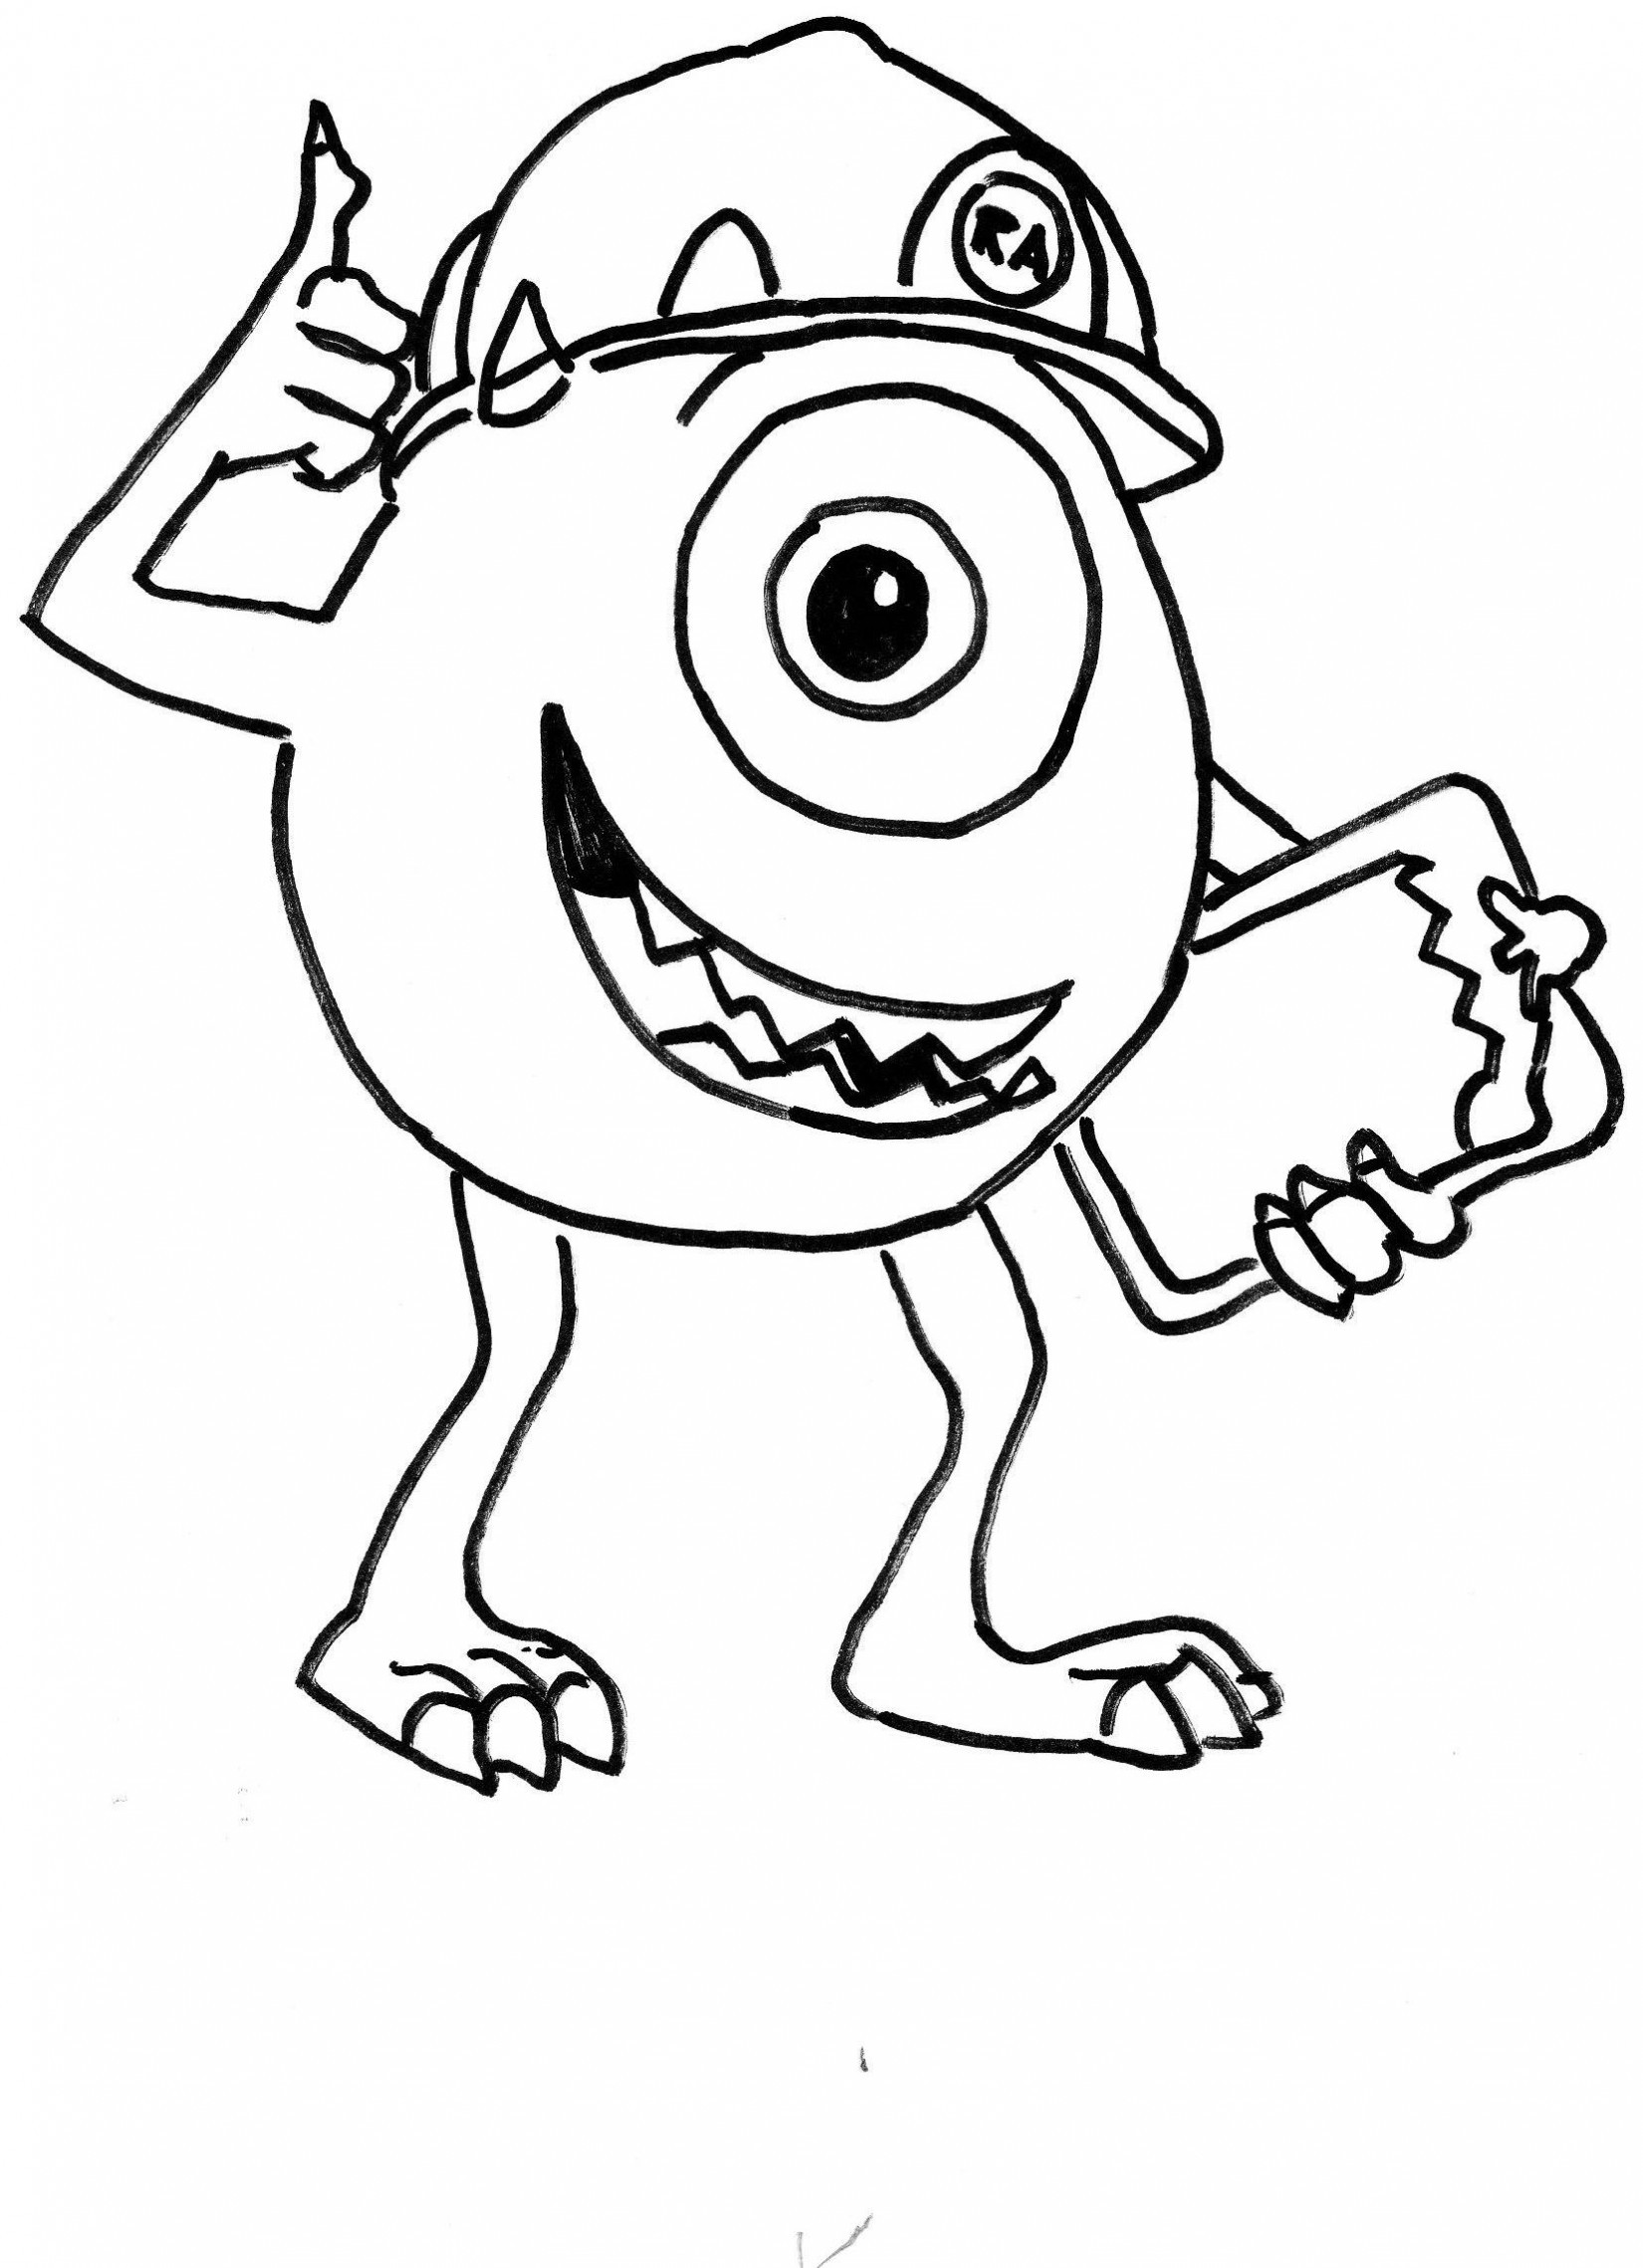 Coloring Sheets Kids
 coloring pages for kids Free